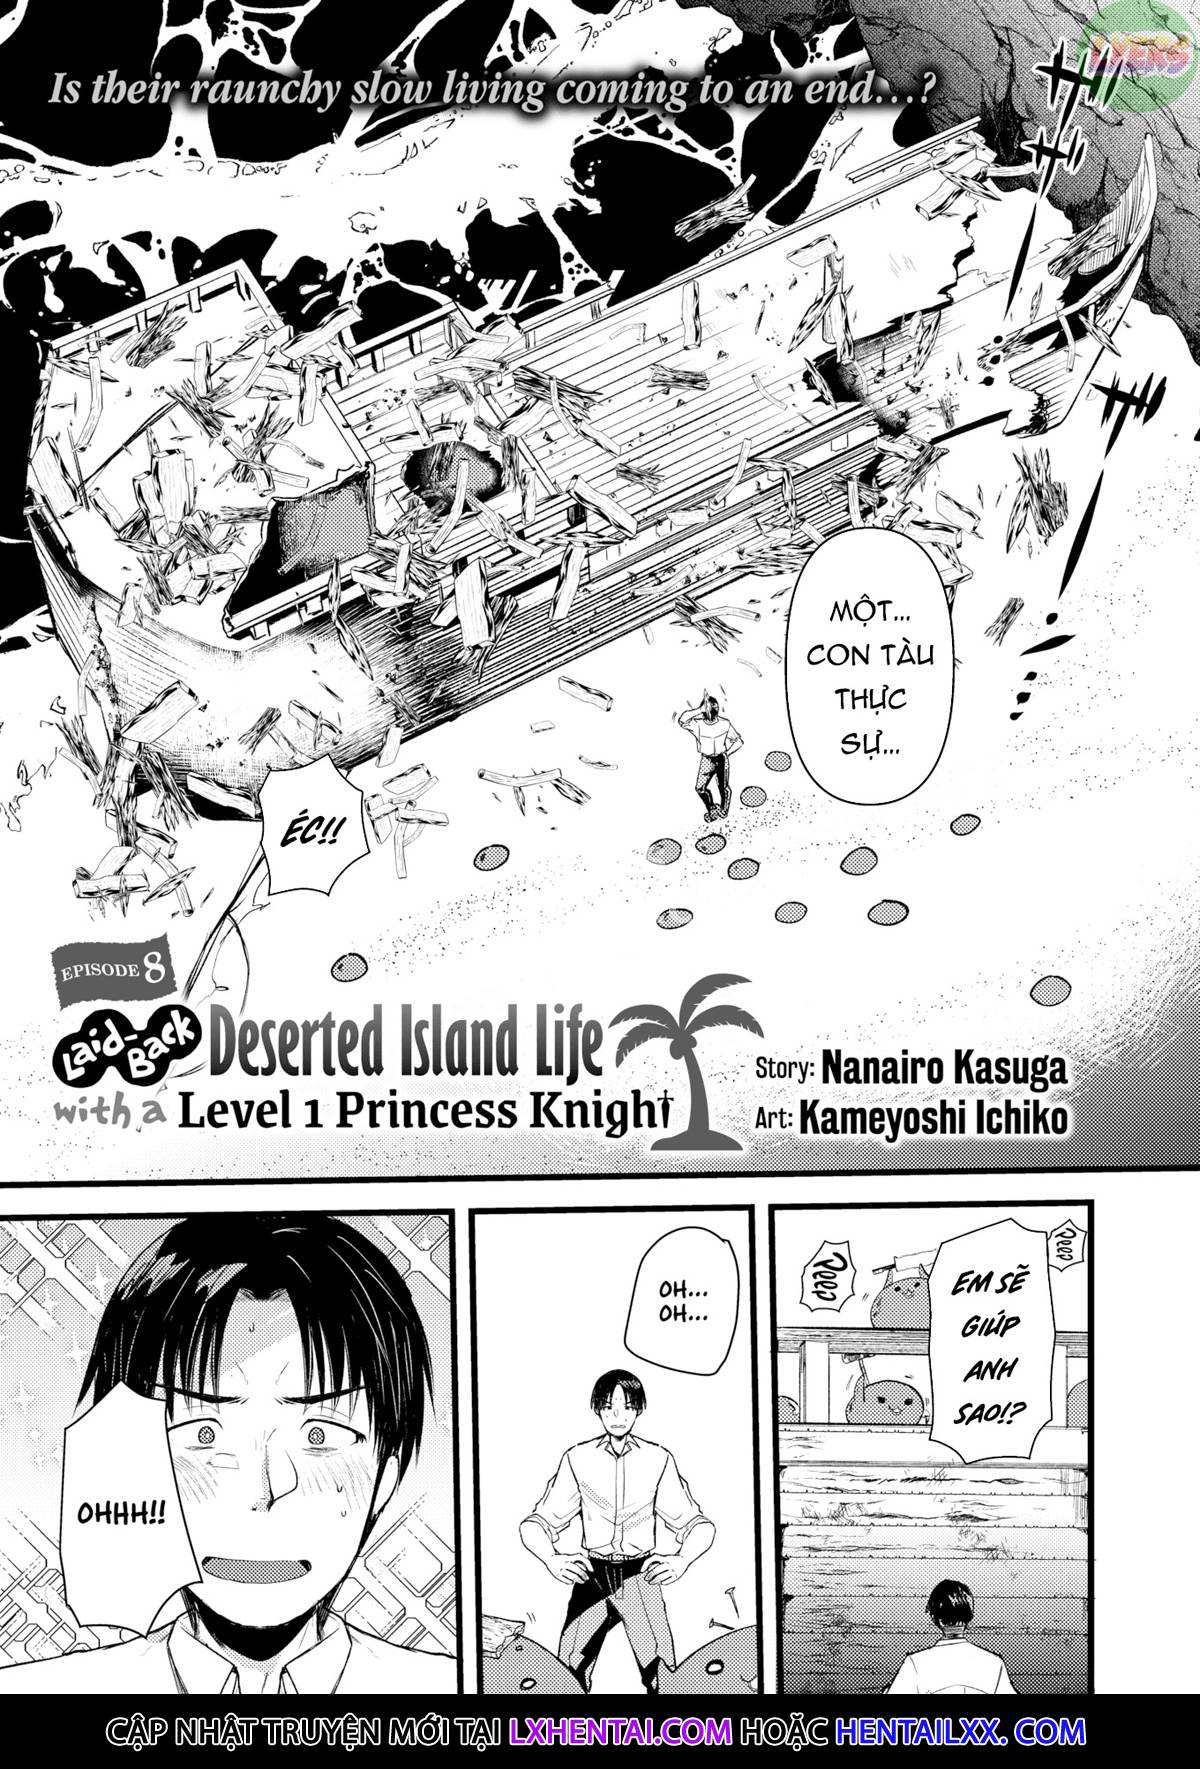 Xem ảnh Laid-Back Deserted Island Life With A Level 1 Princess Knight - Chapter 8 - 6 - Hentai24h.Tv